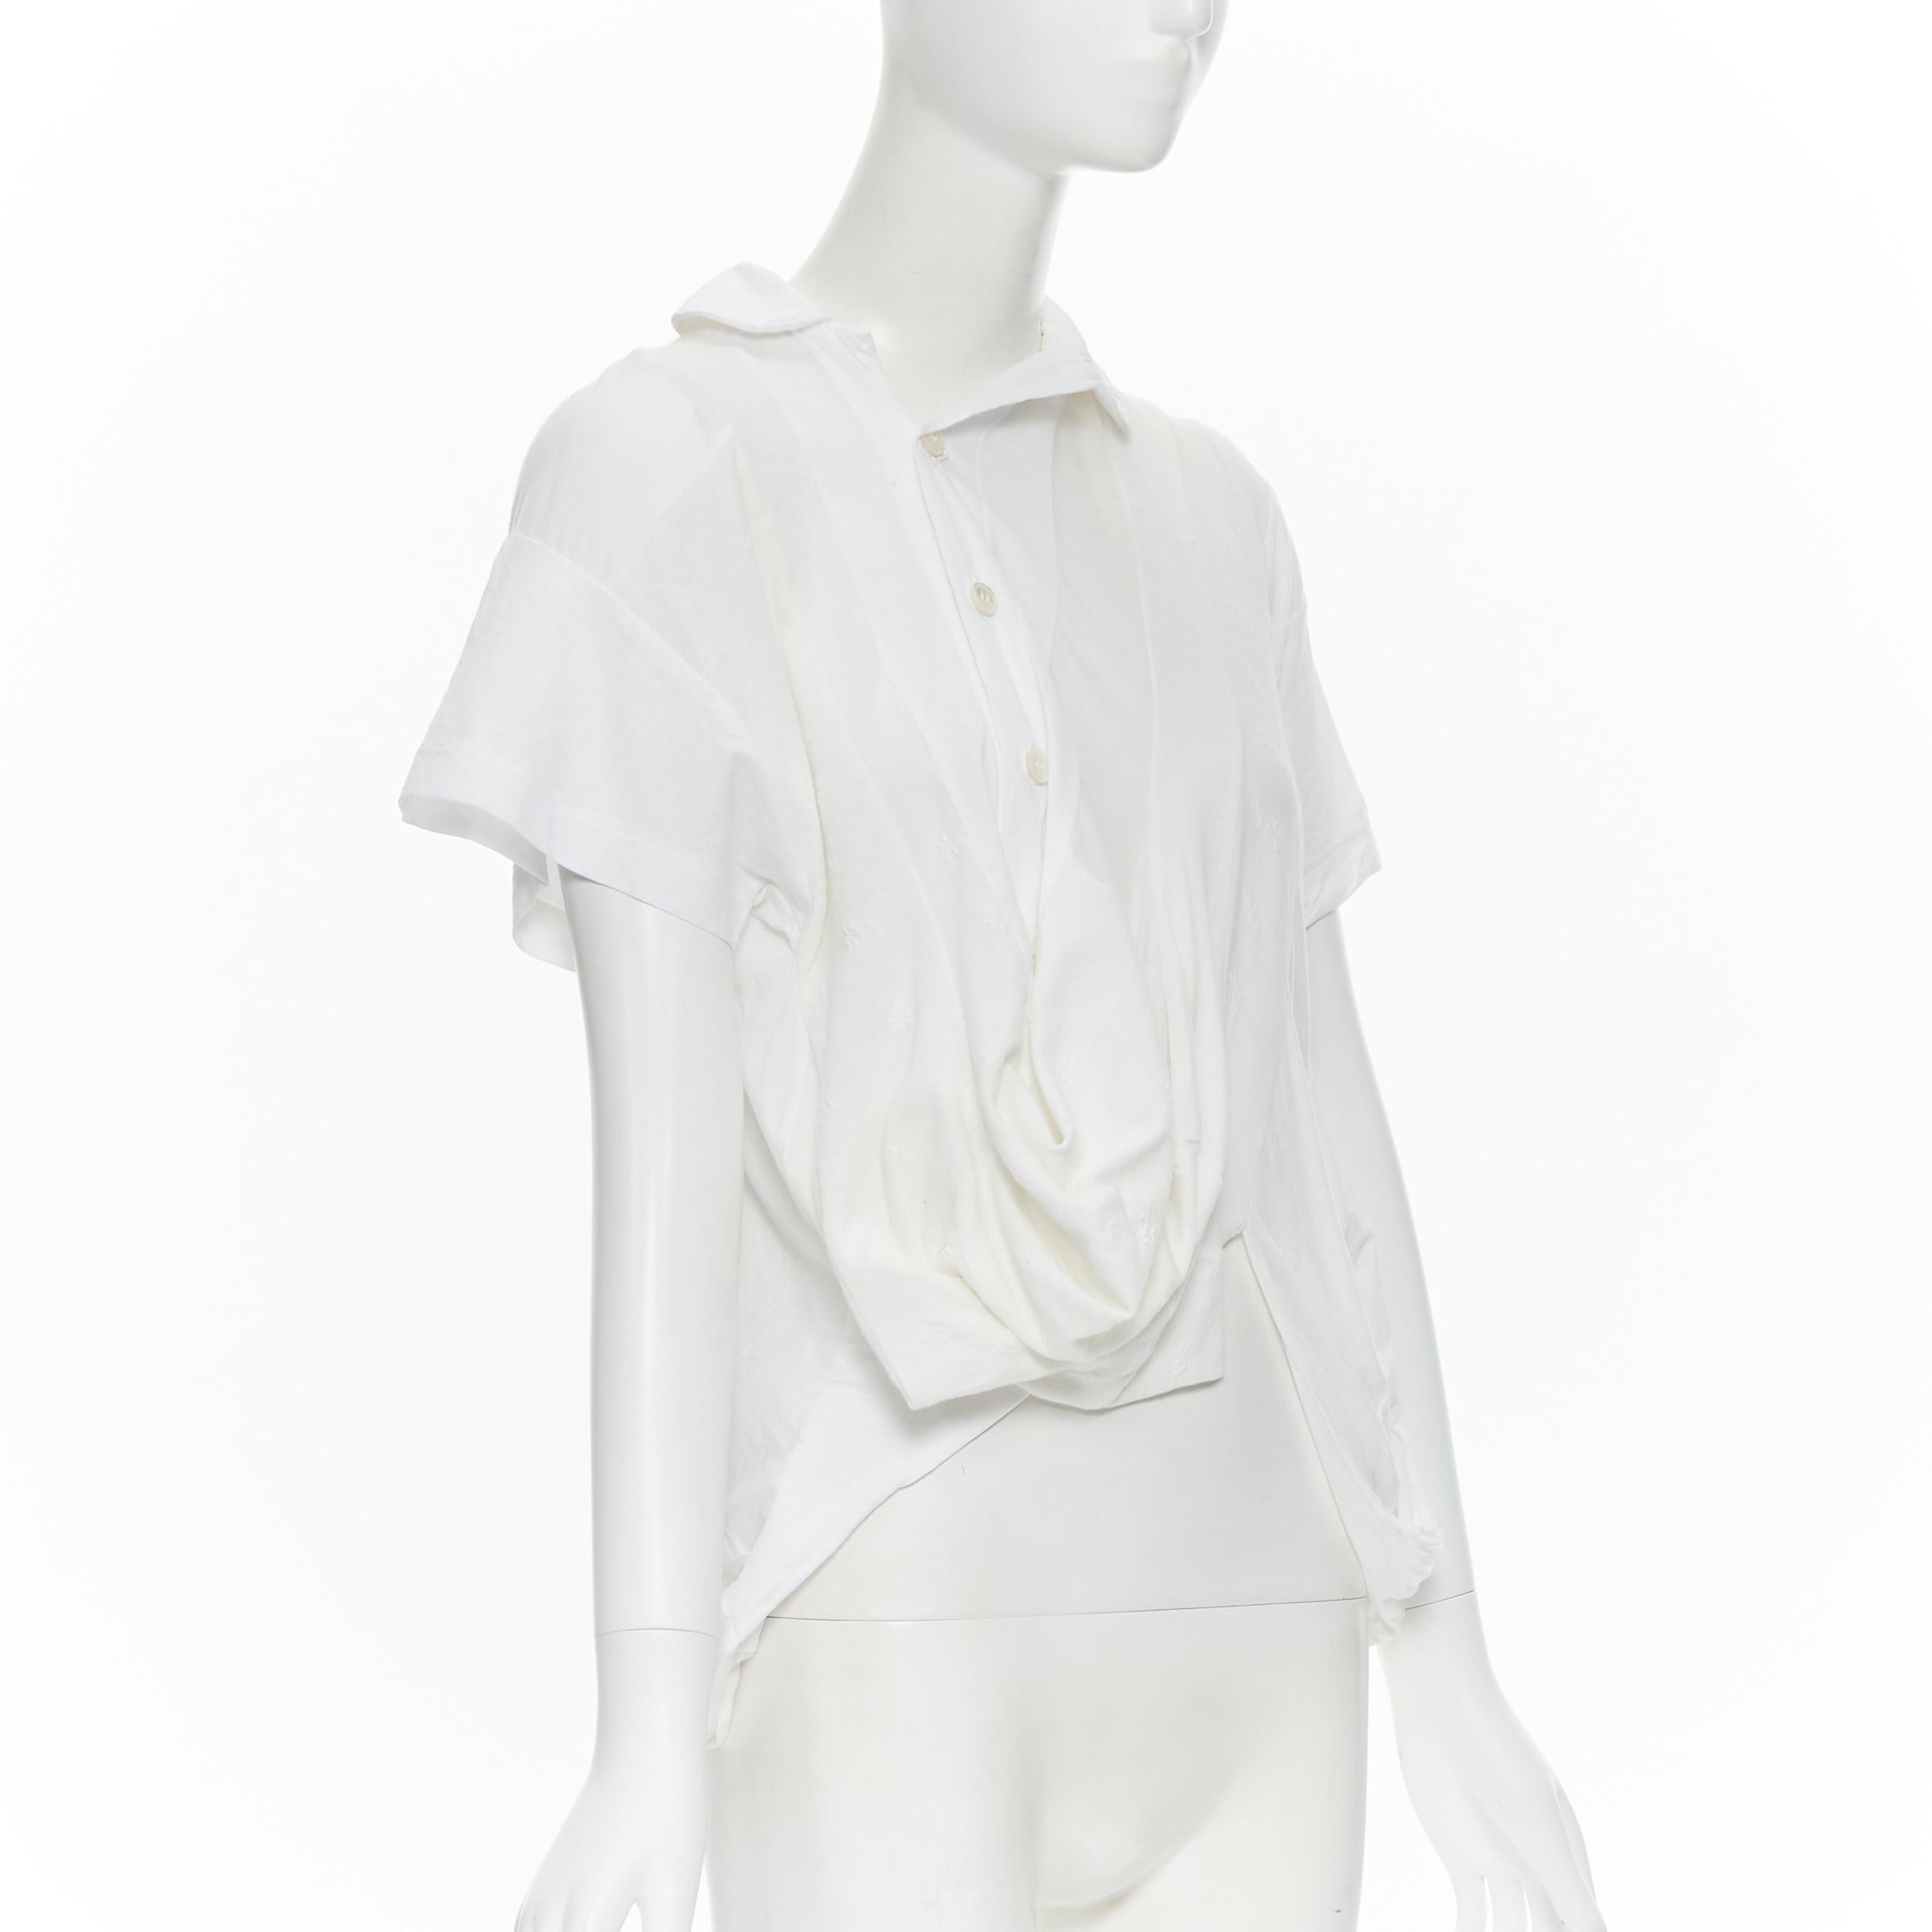 Gray new TRICOT COMME DES GARCONS 2013 white patchwork deconstructed top M